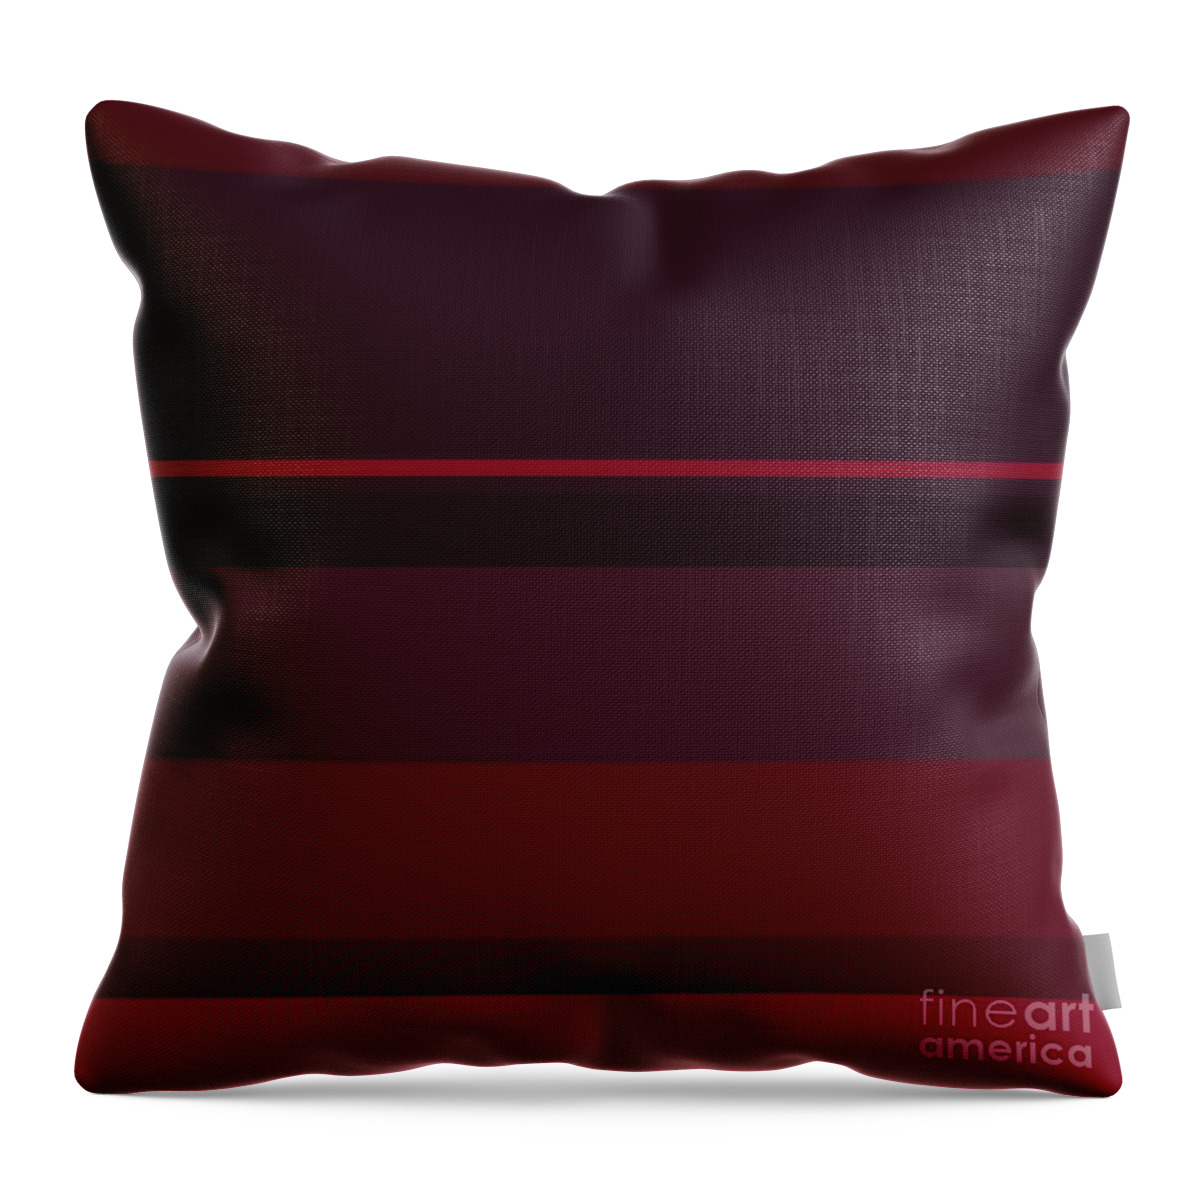 Red Throw Pillow featuring the digital art Plum by Wade Hampton